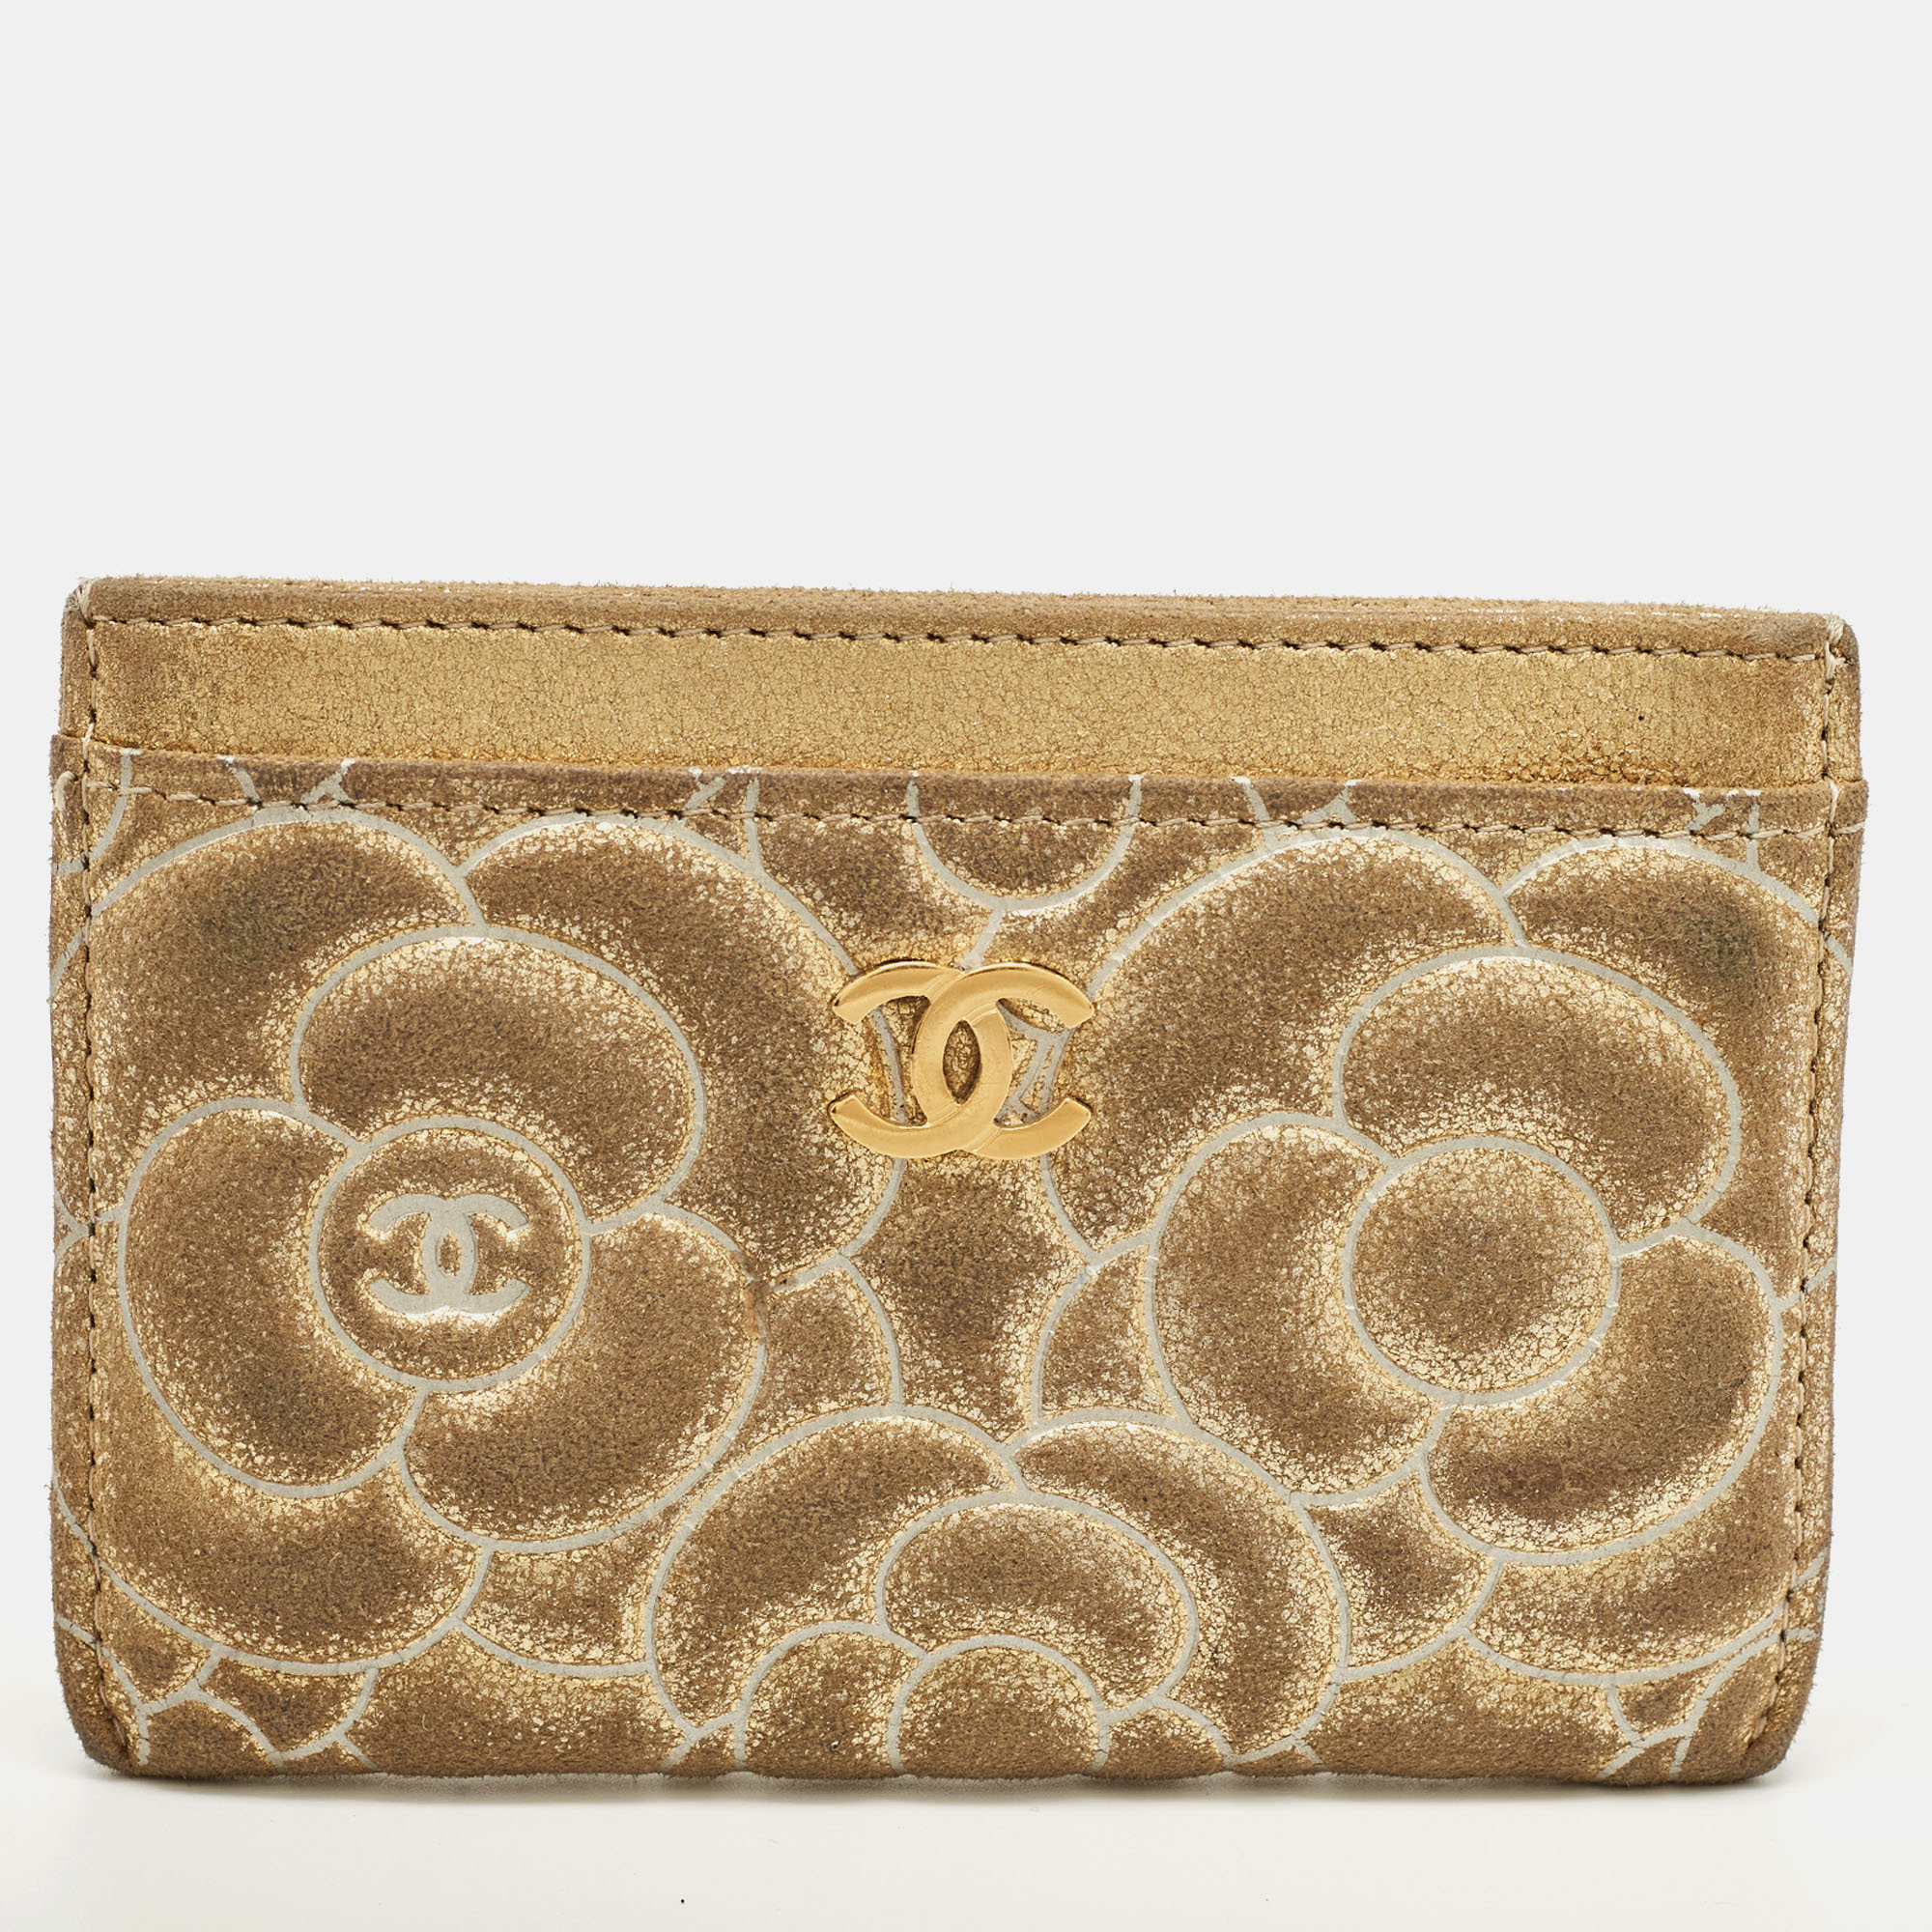 Chanel gold suede camellia embossed classic card holder